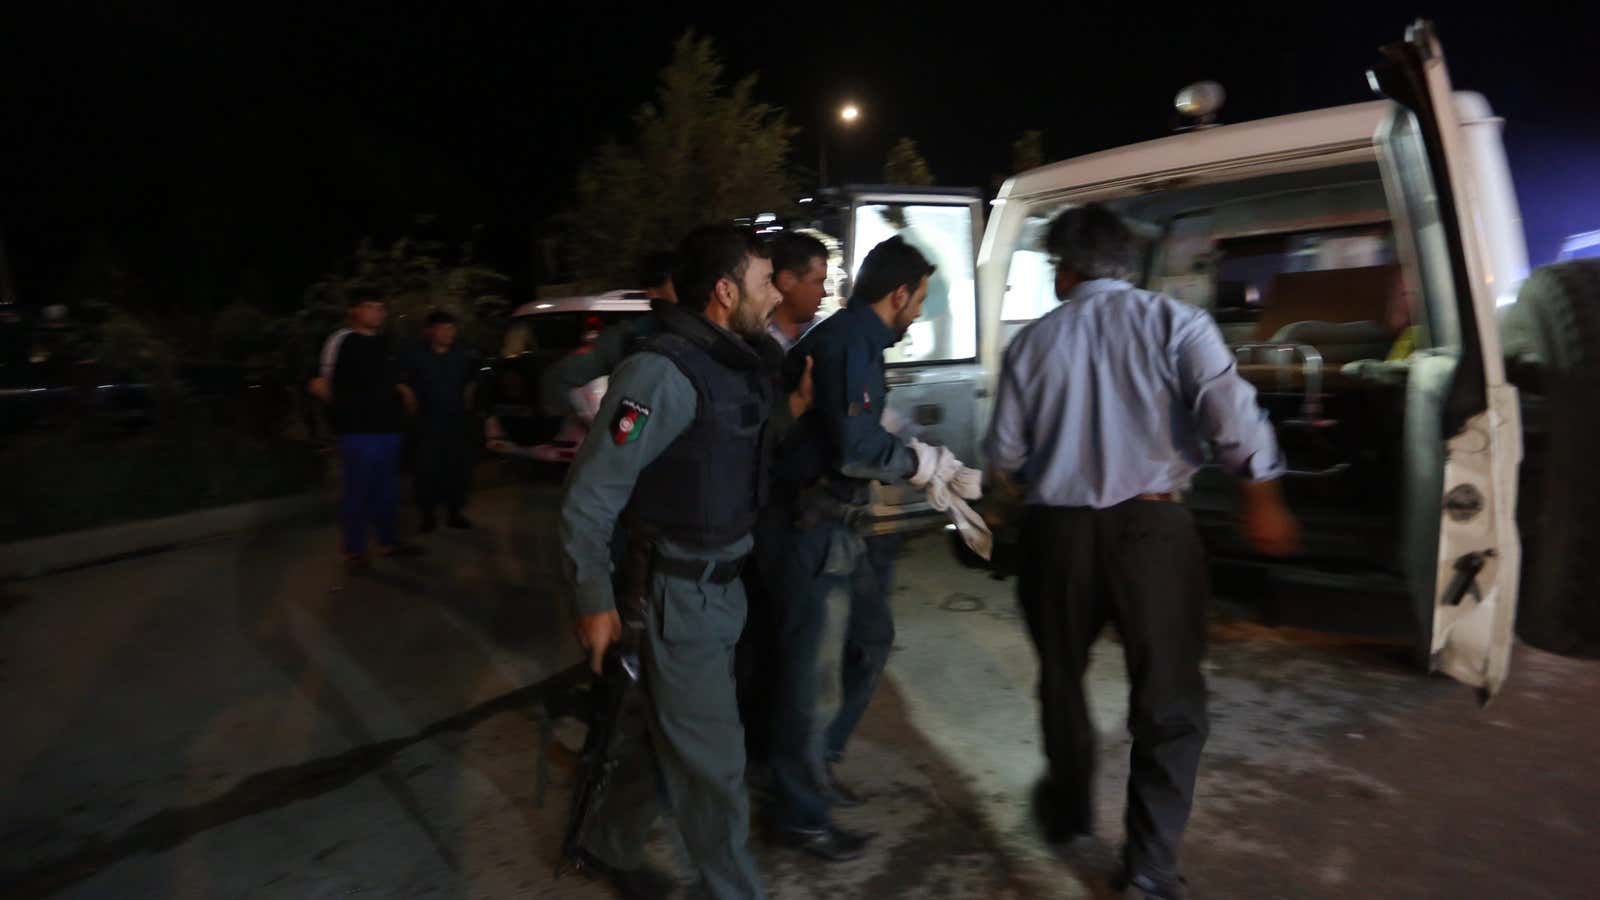 The American University in Kabul came under attack Wednesday, Aug. 24.